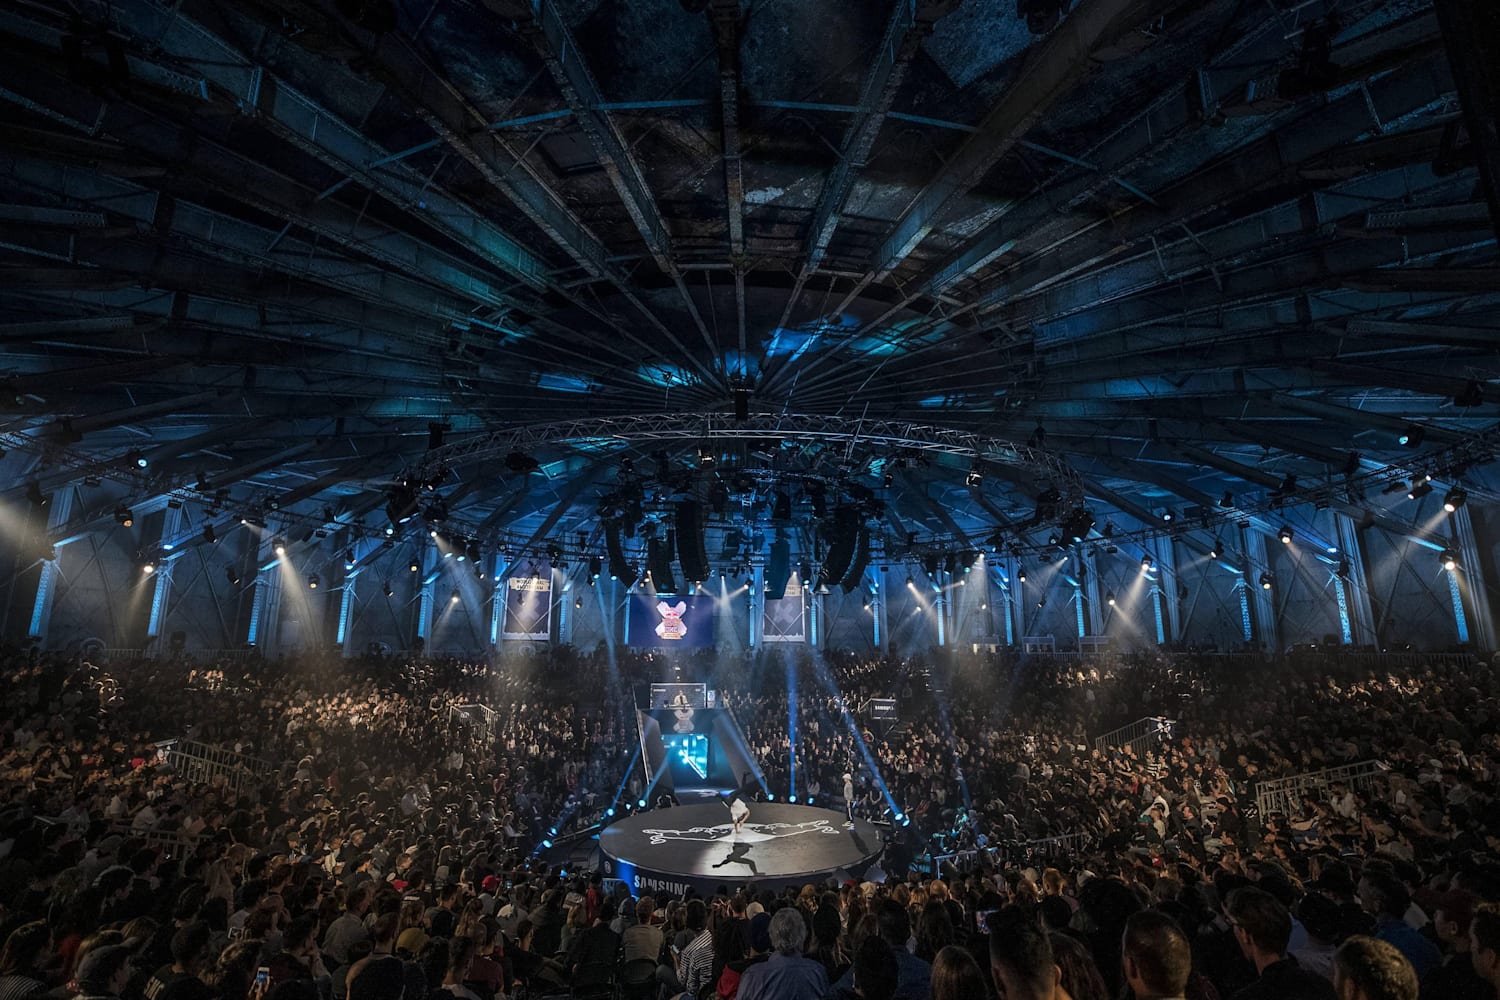 Red Bull BC One World Final in Amsterdam